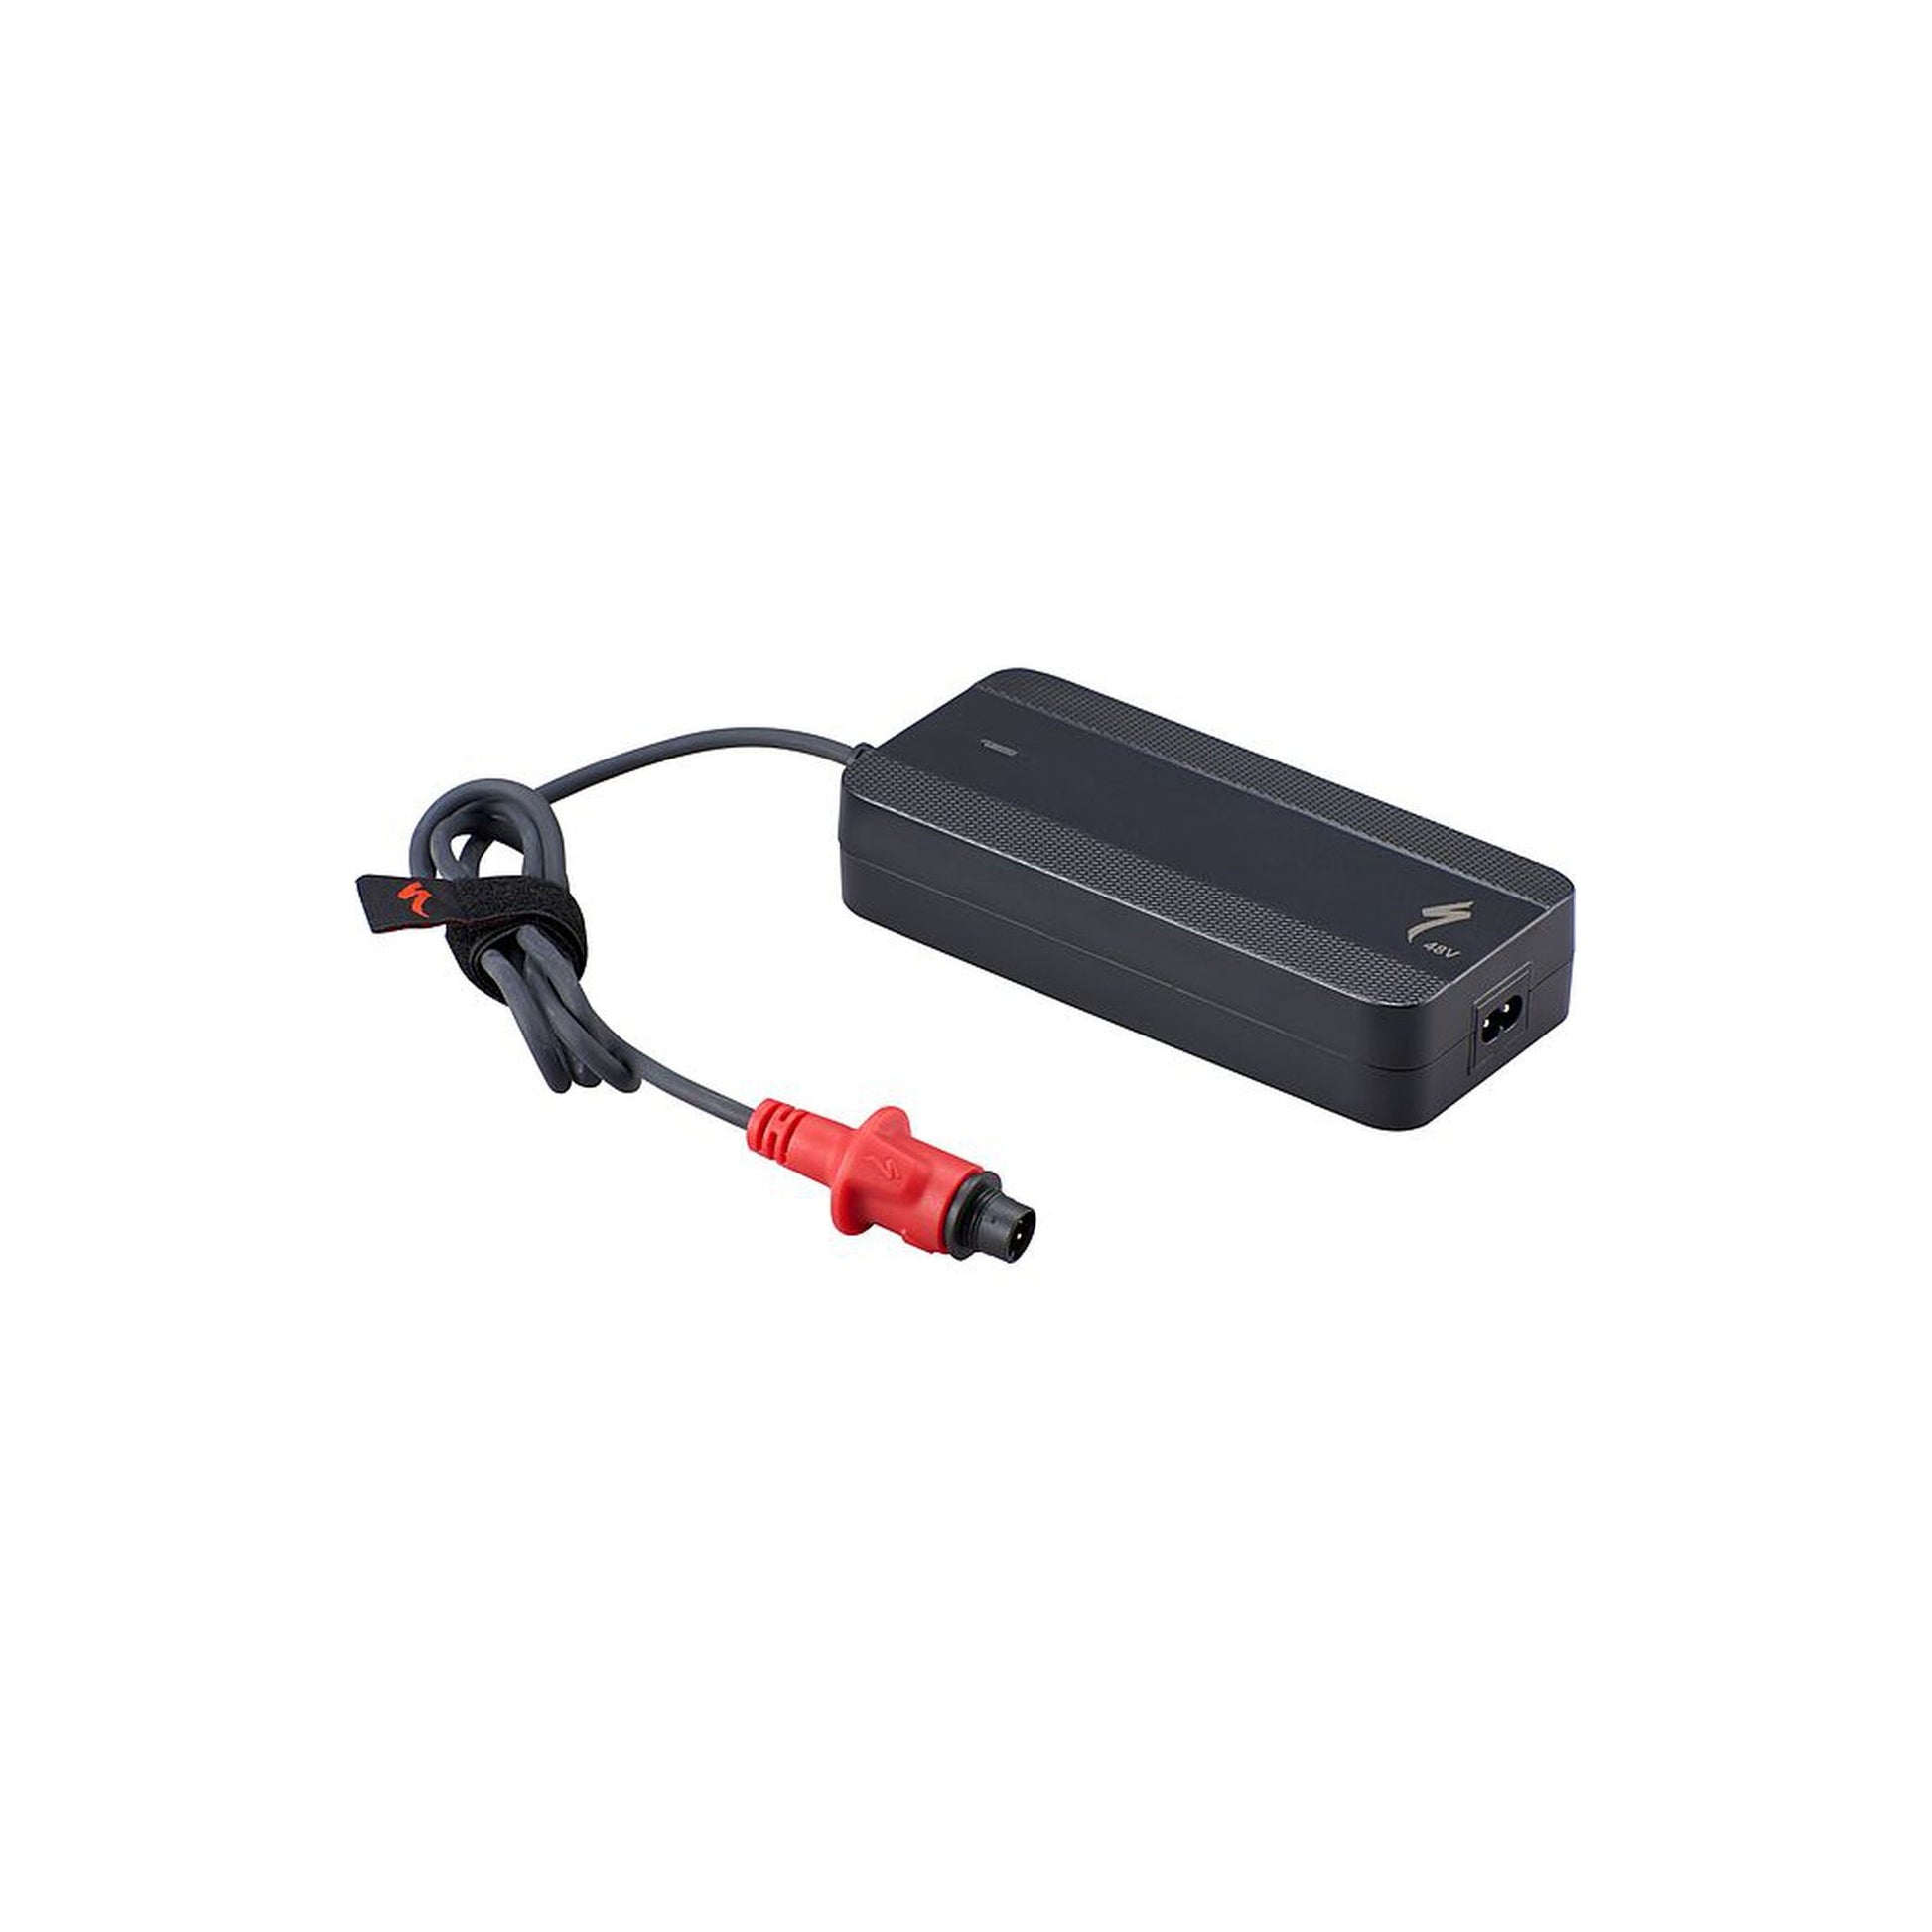 SL Battery Charger | completecyclist - Quickly charges your Specialized SL battery.